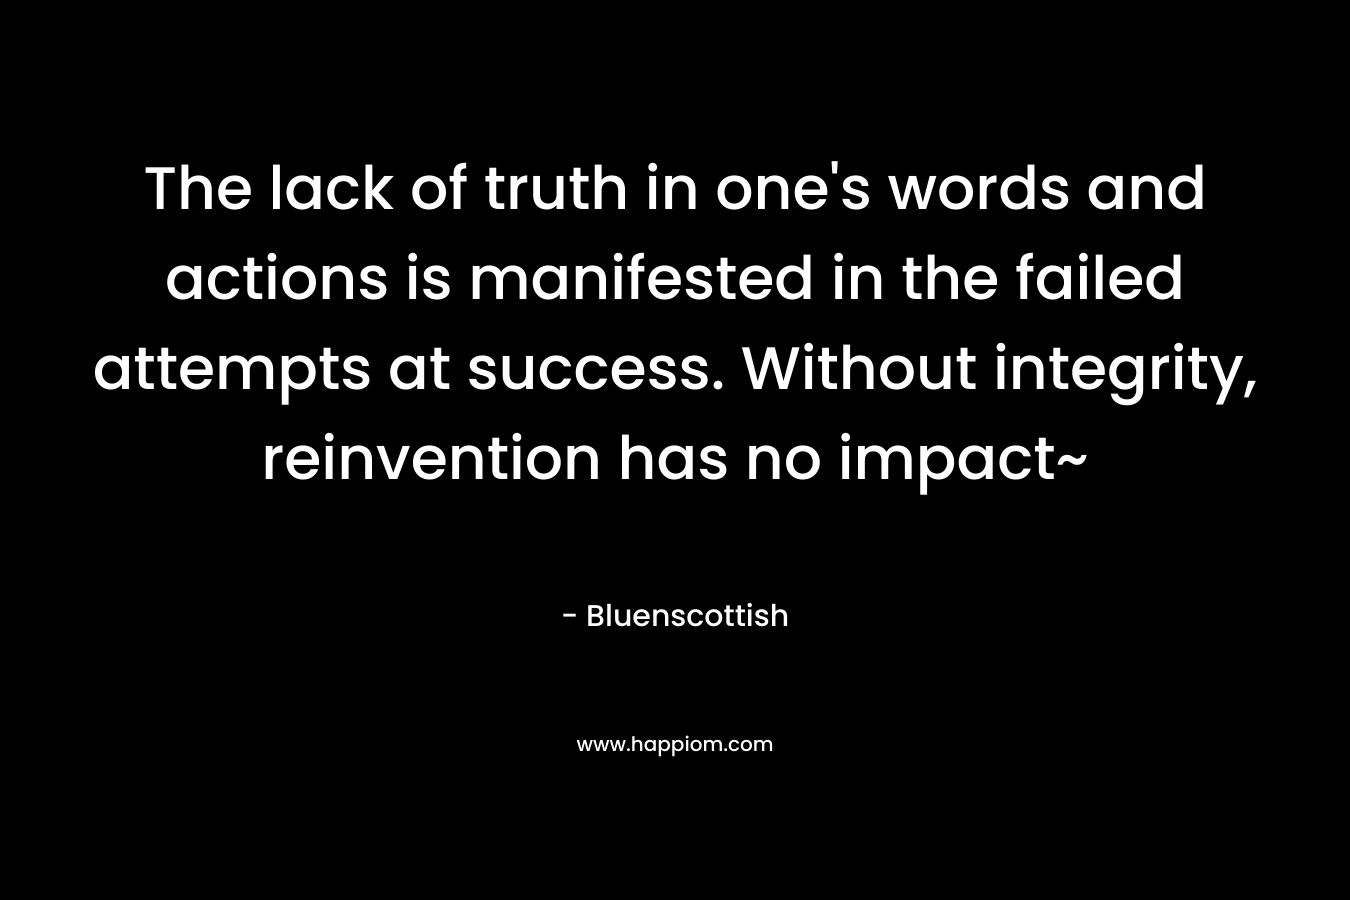 The lack of truth in one's words and actions is manifested in the failed attempts at success. Without integrity, reinvention has no impact~